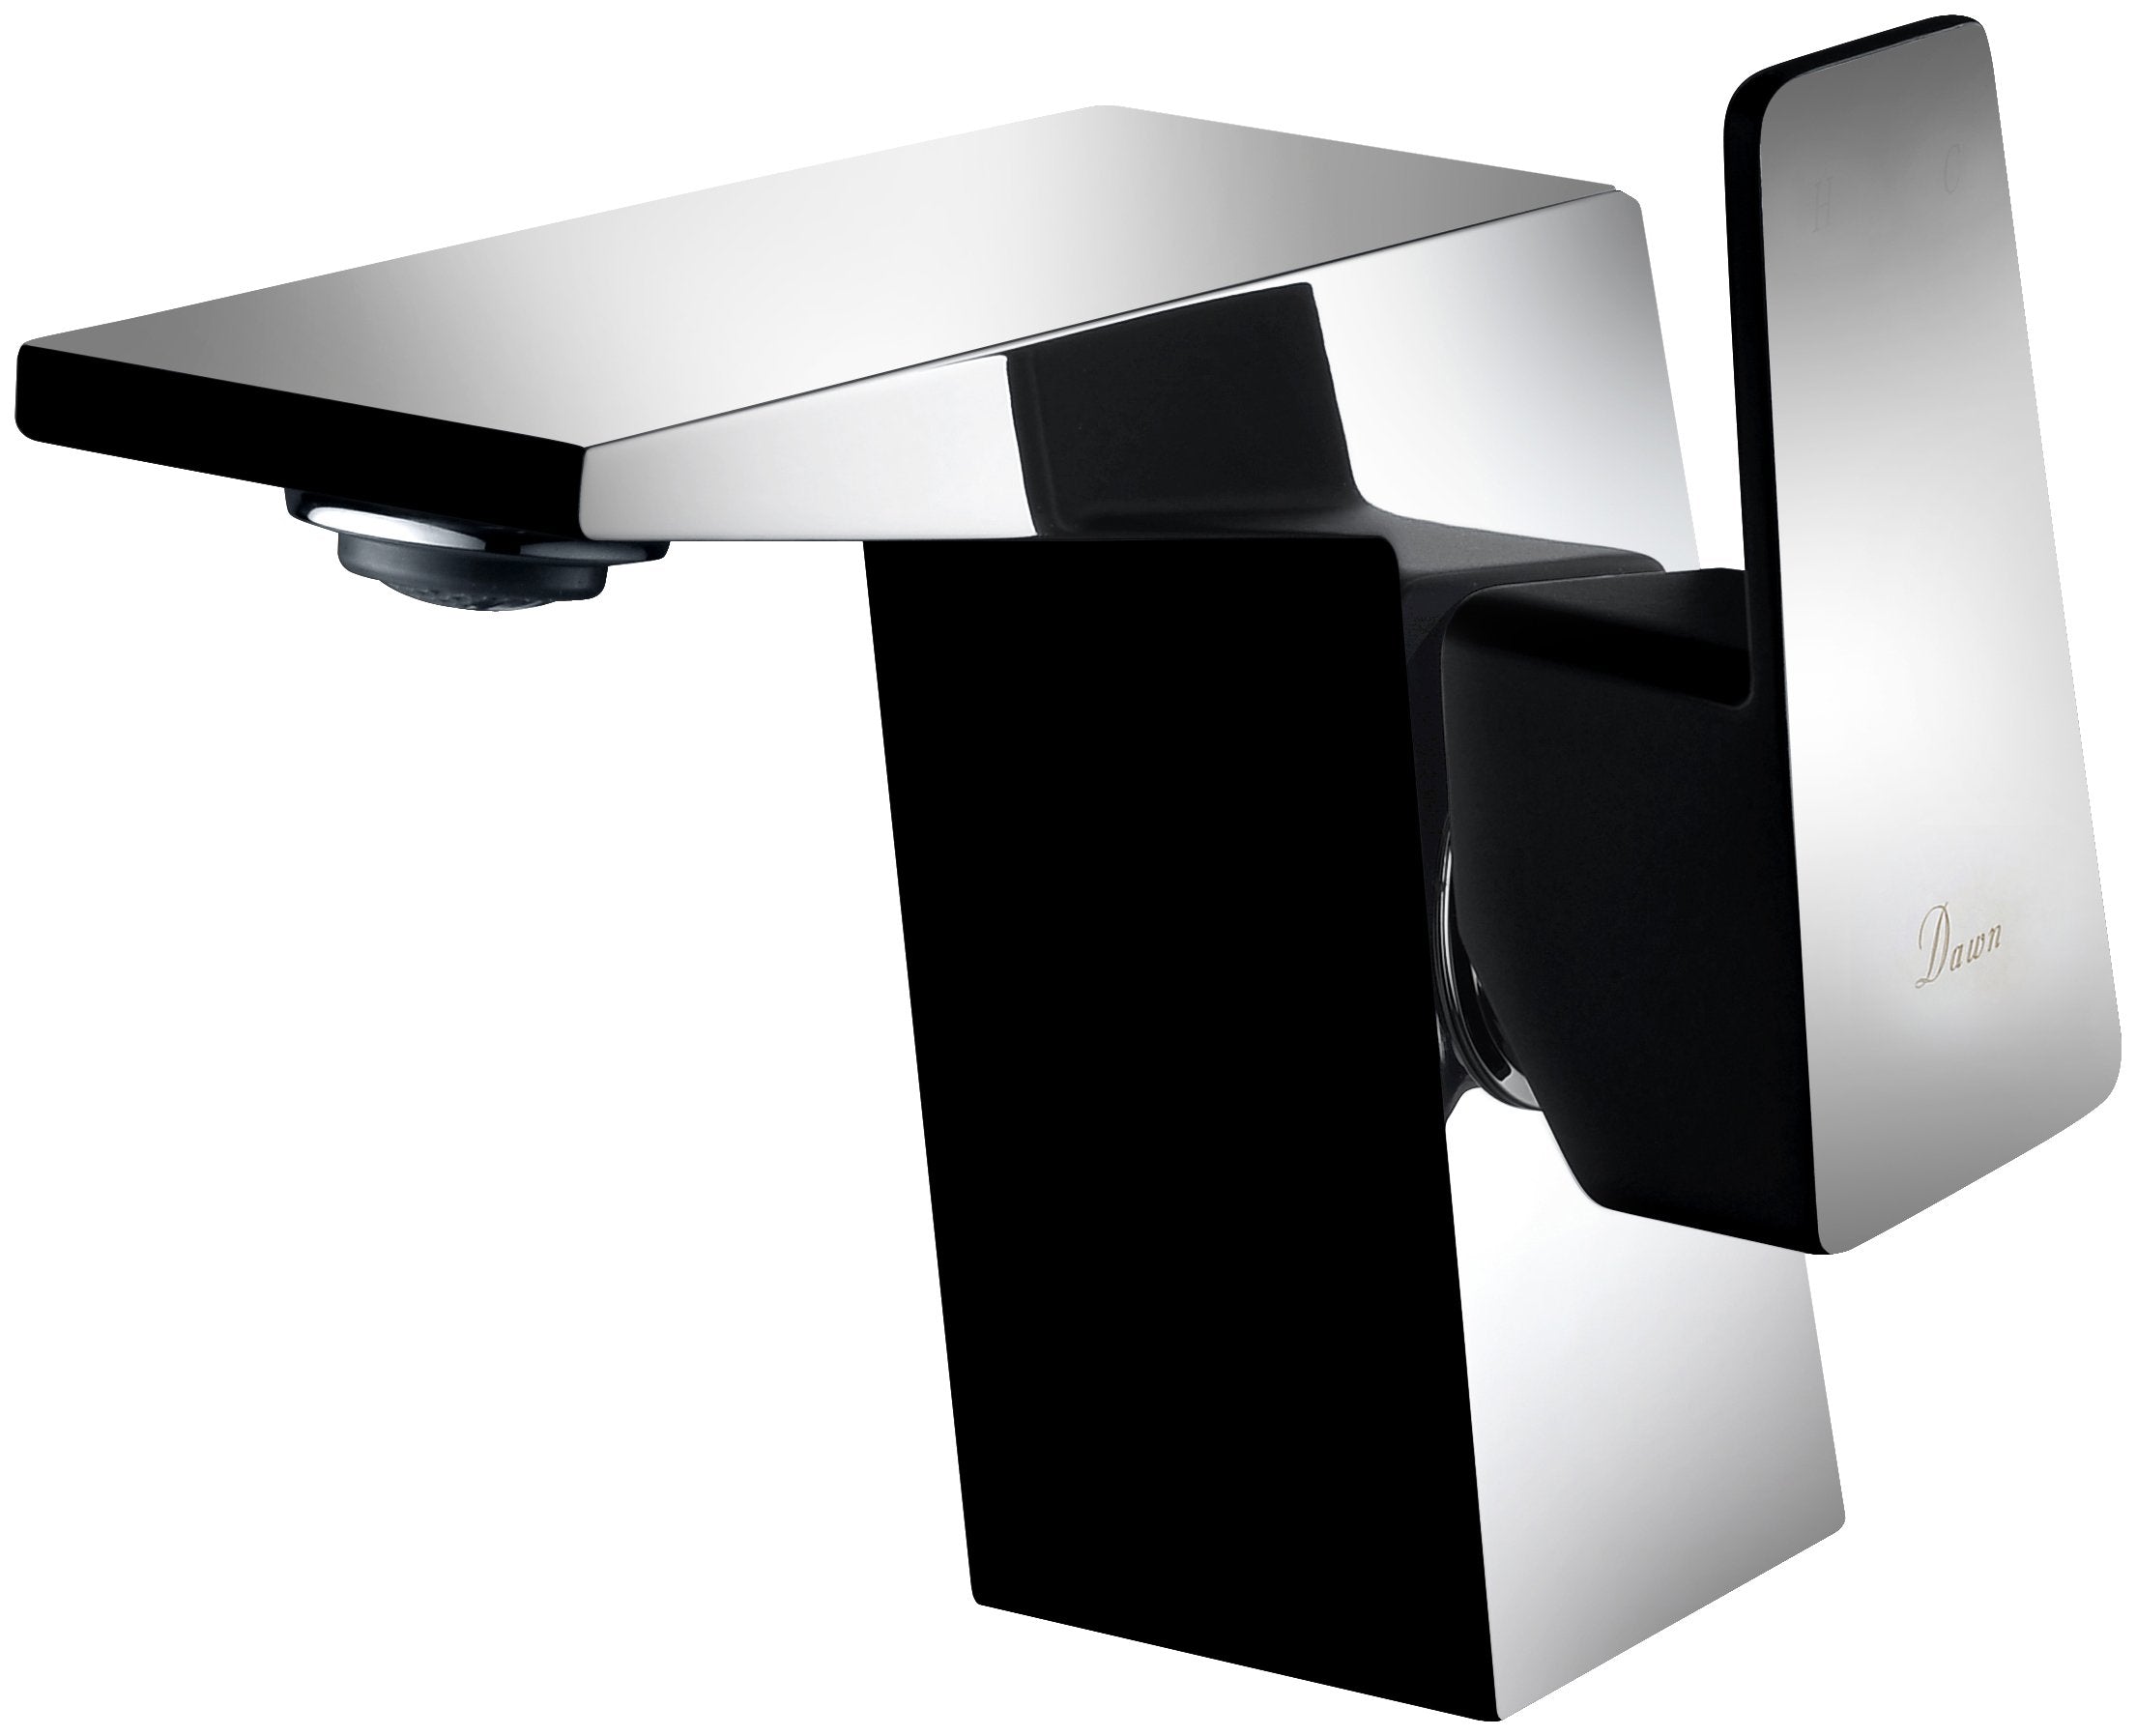 Dawn Single Lever Lavatory Faucet-Bathroom Faucets Fast Shipping at DirectSinks.